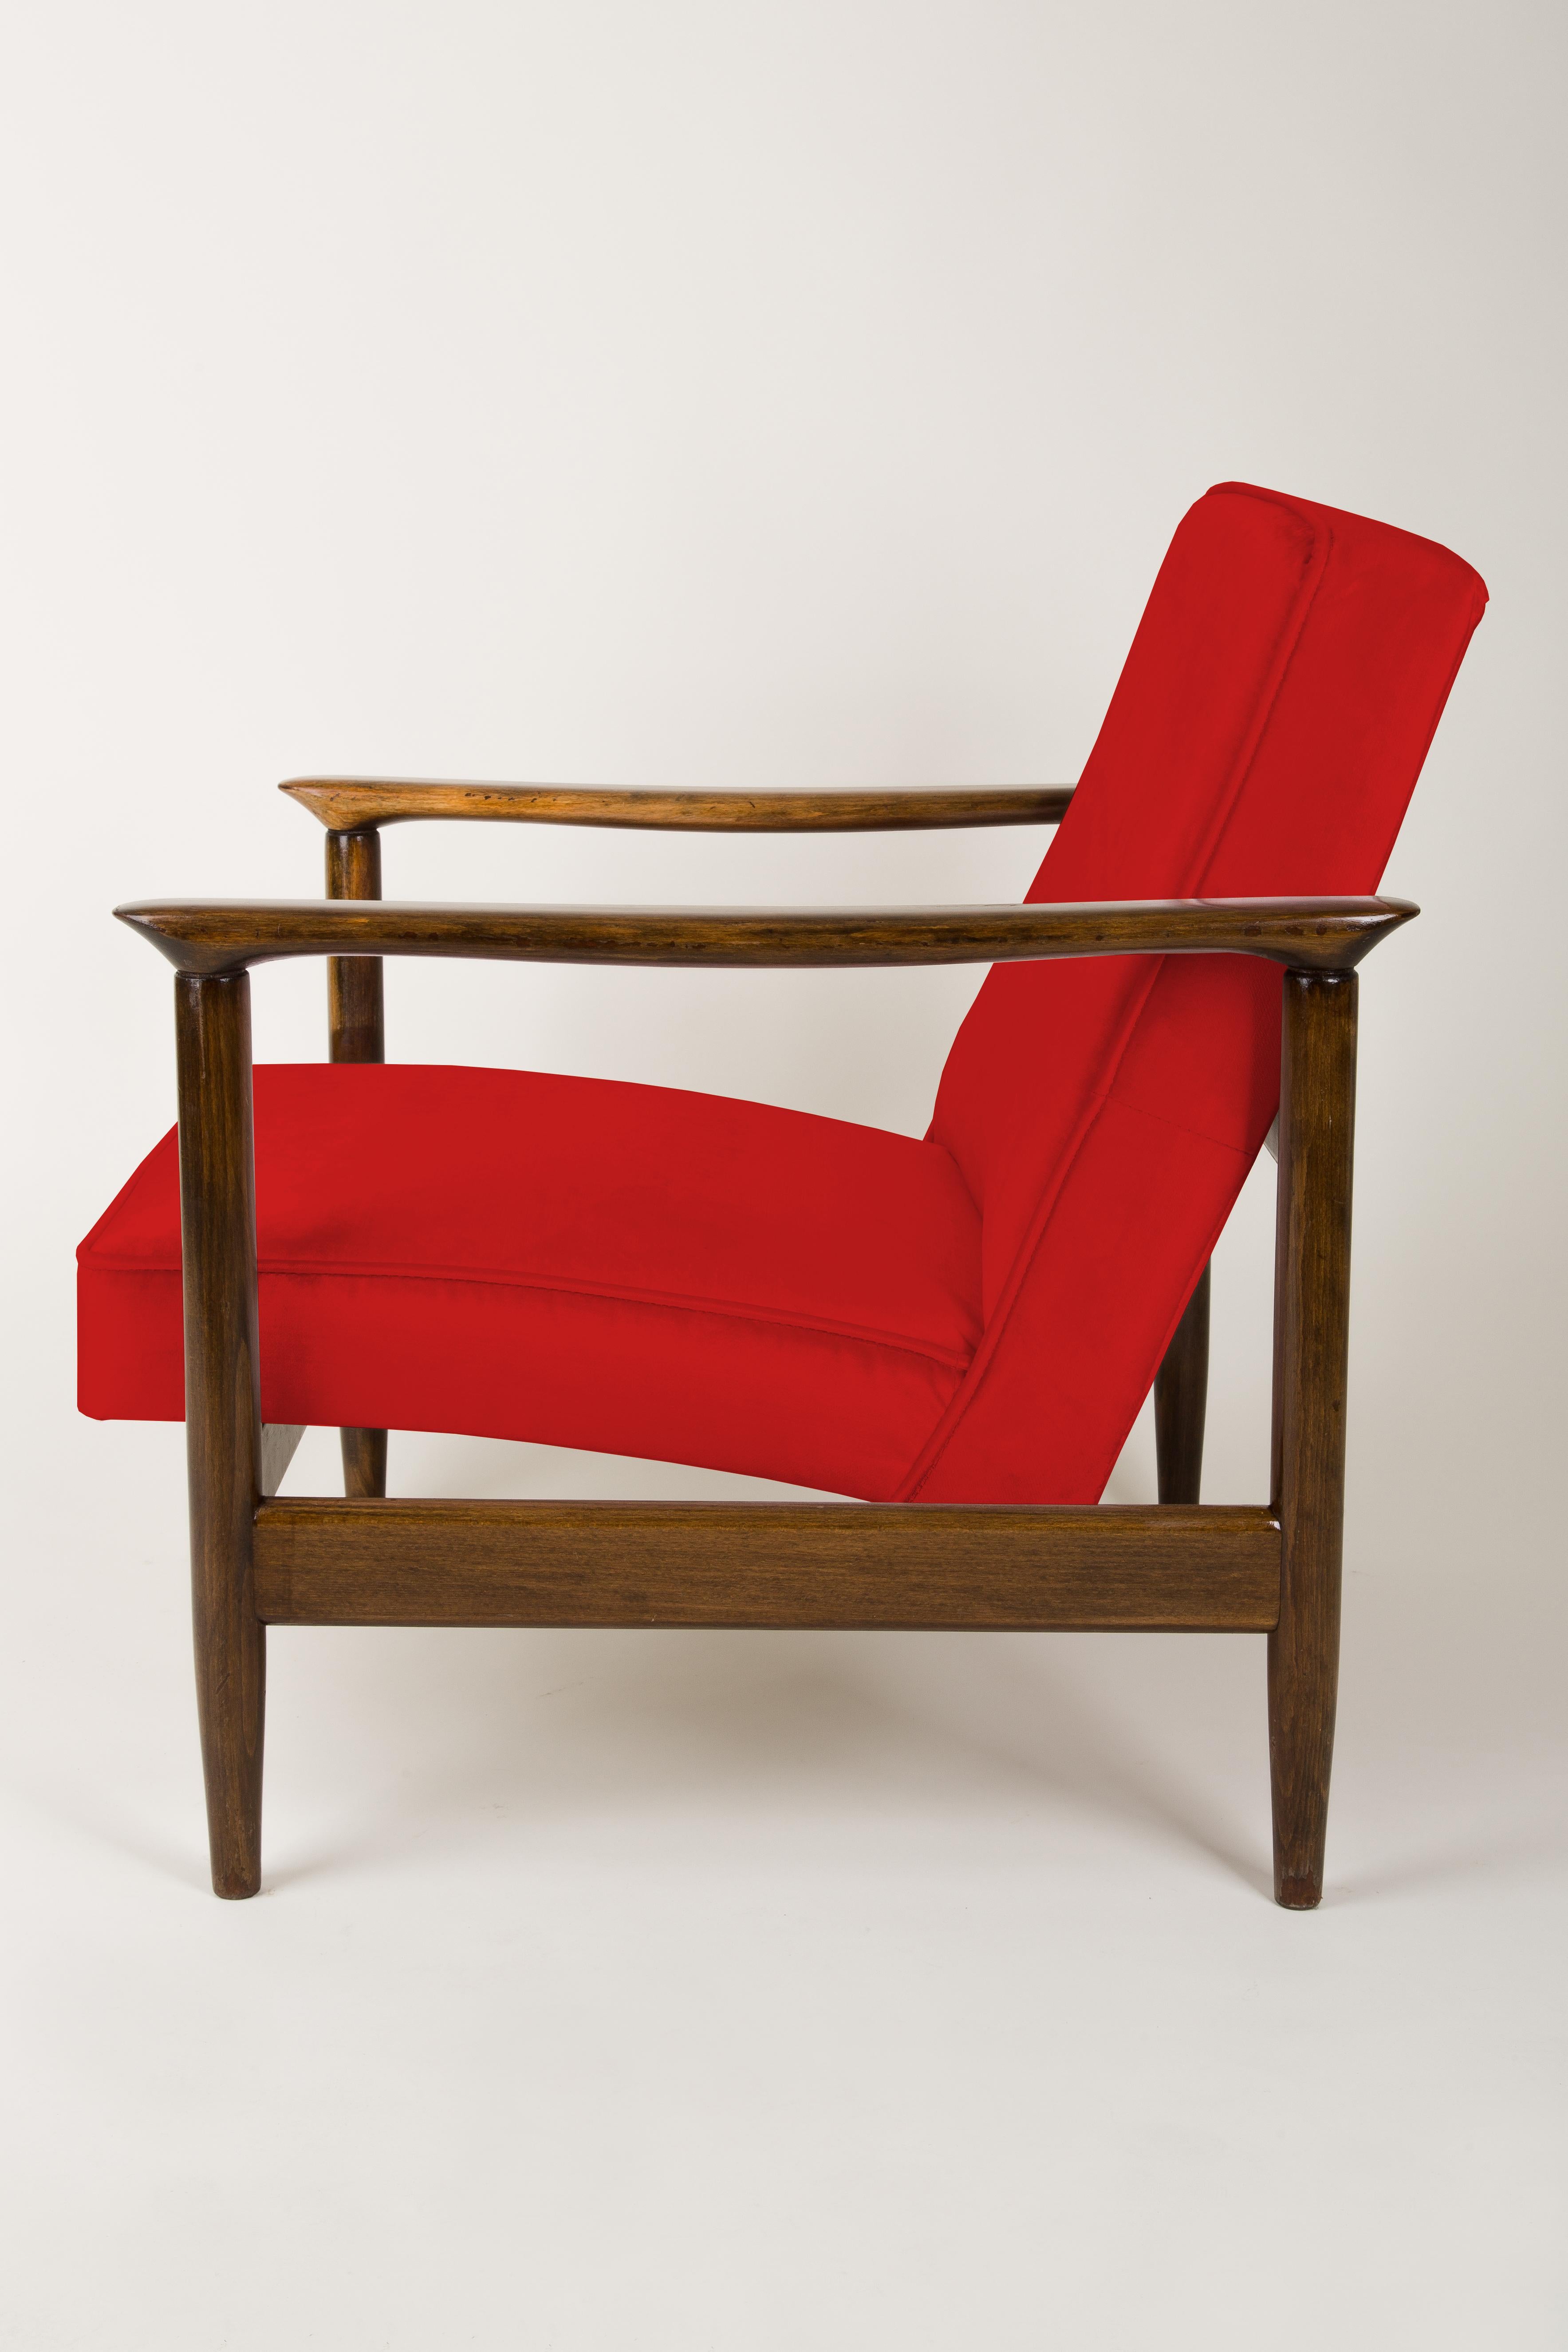 20th Century Pair of Red Armchairs, Edmund Homa, GFM-142, 1960s, Poland For Sale